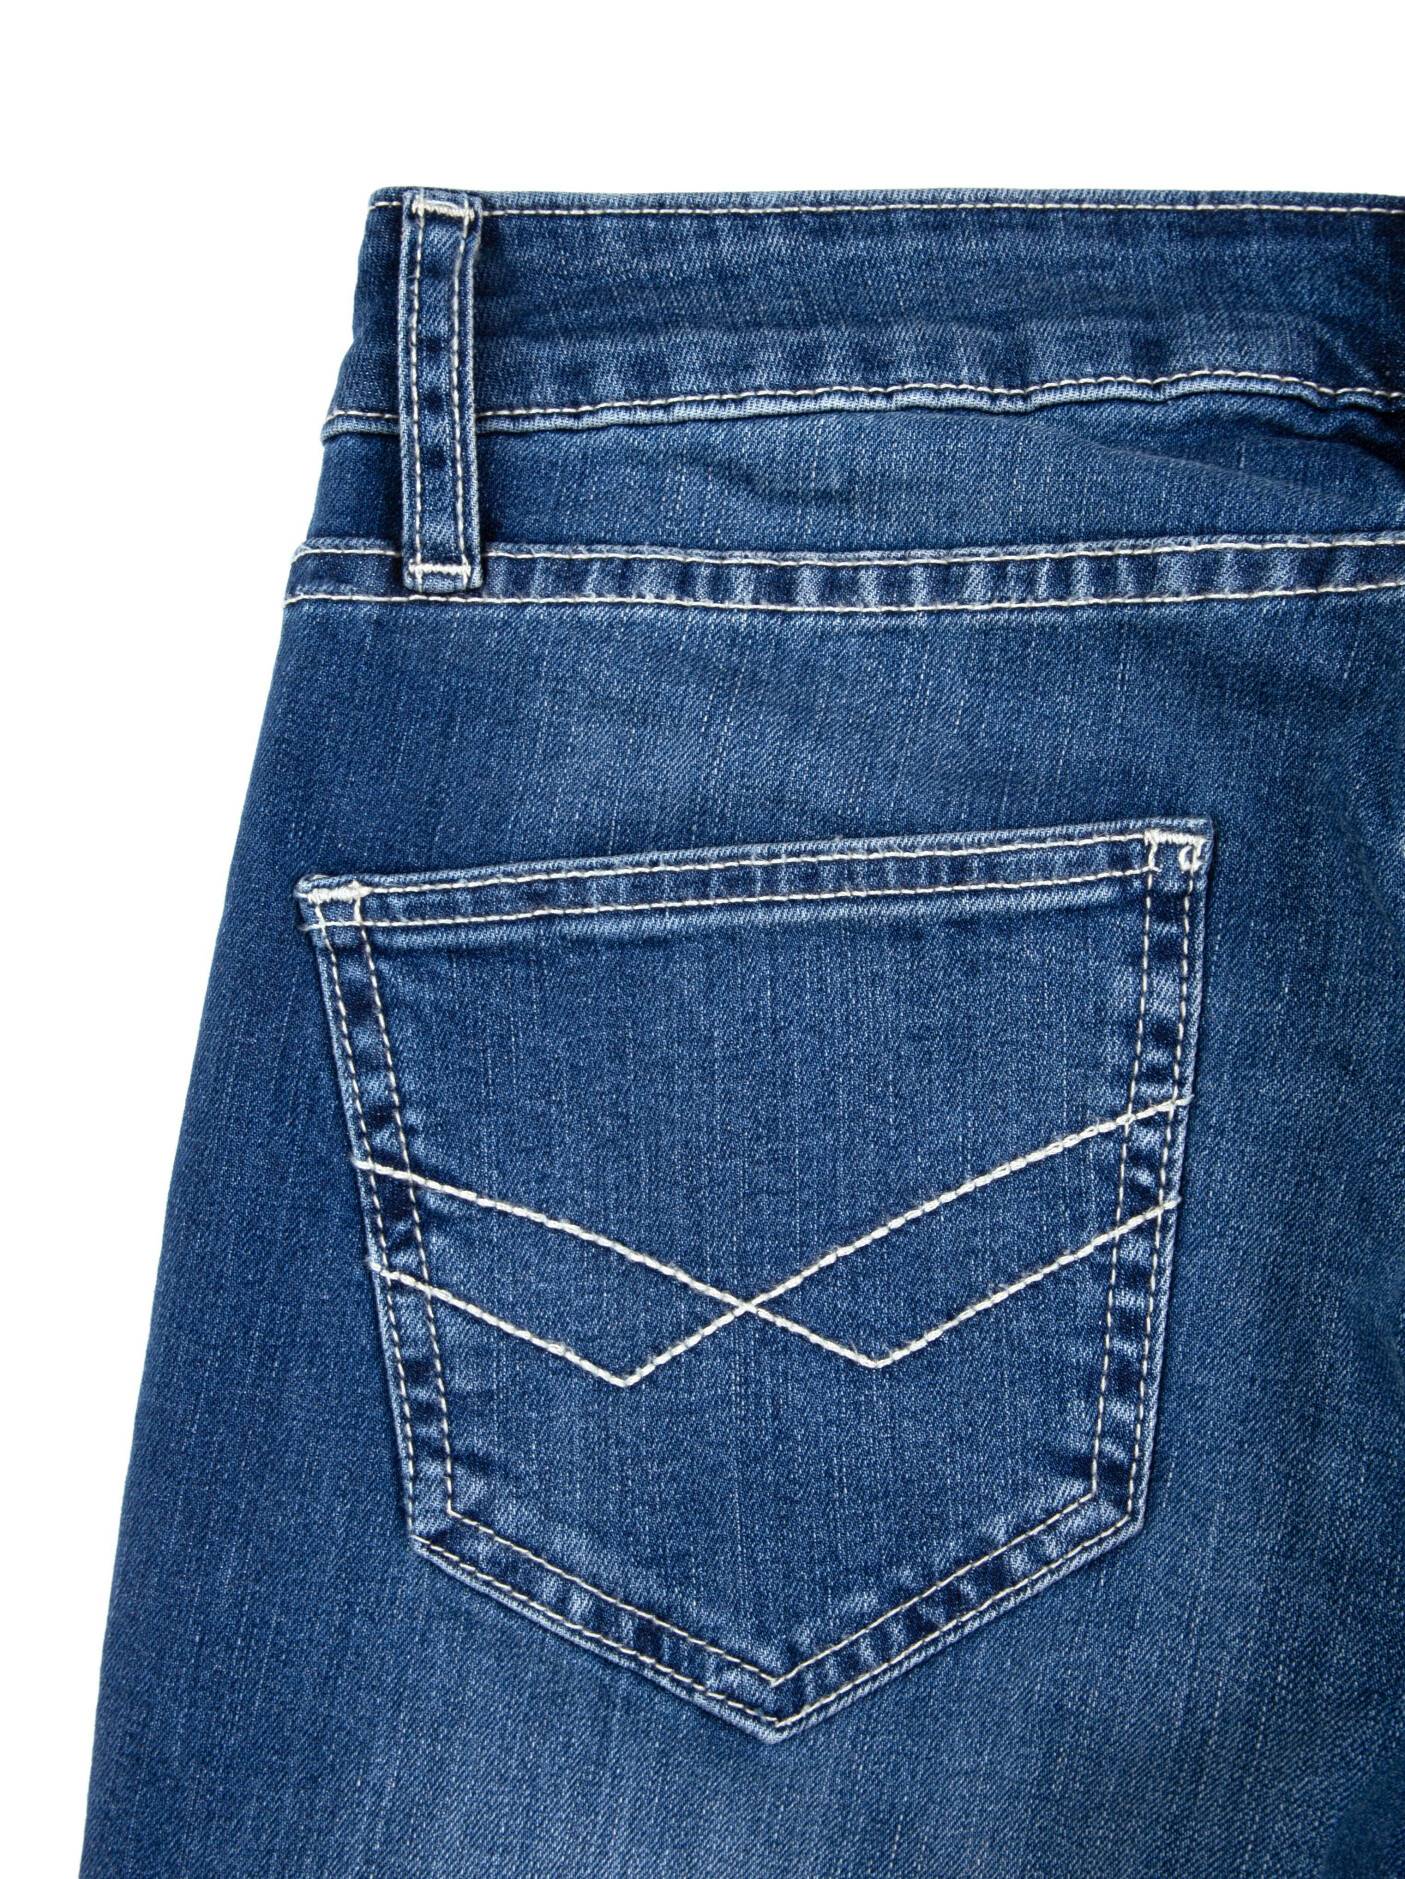 classic straight jeans with a medium fit 2091/49123 - Official online ...